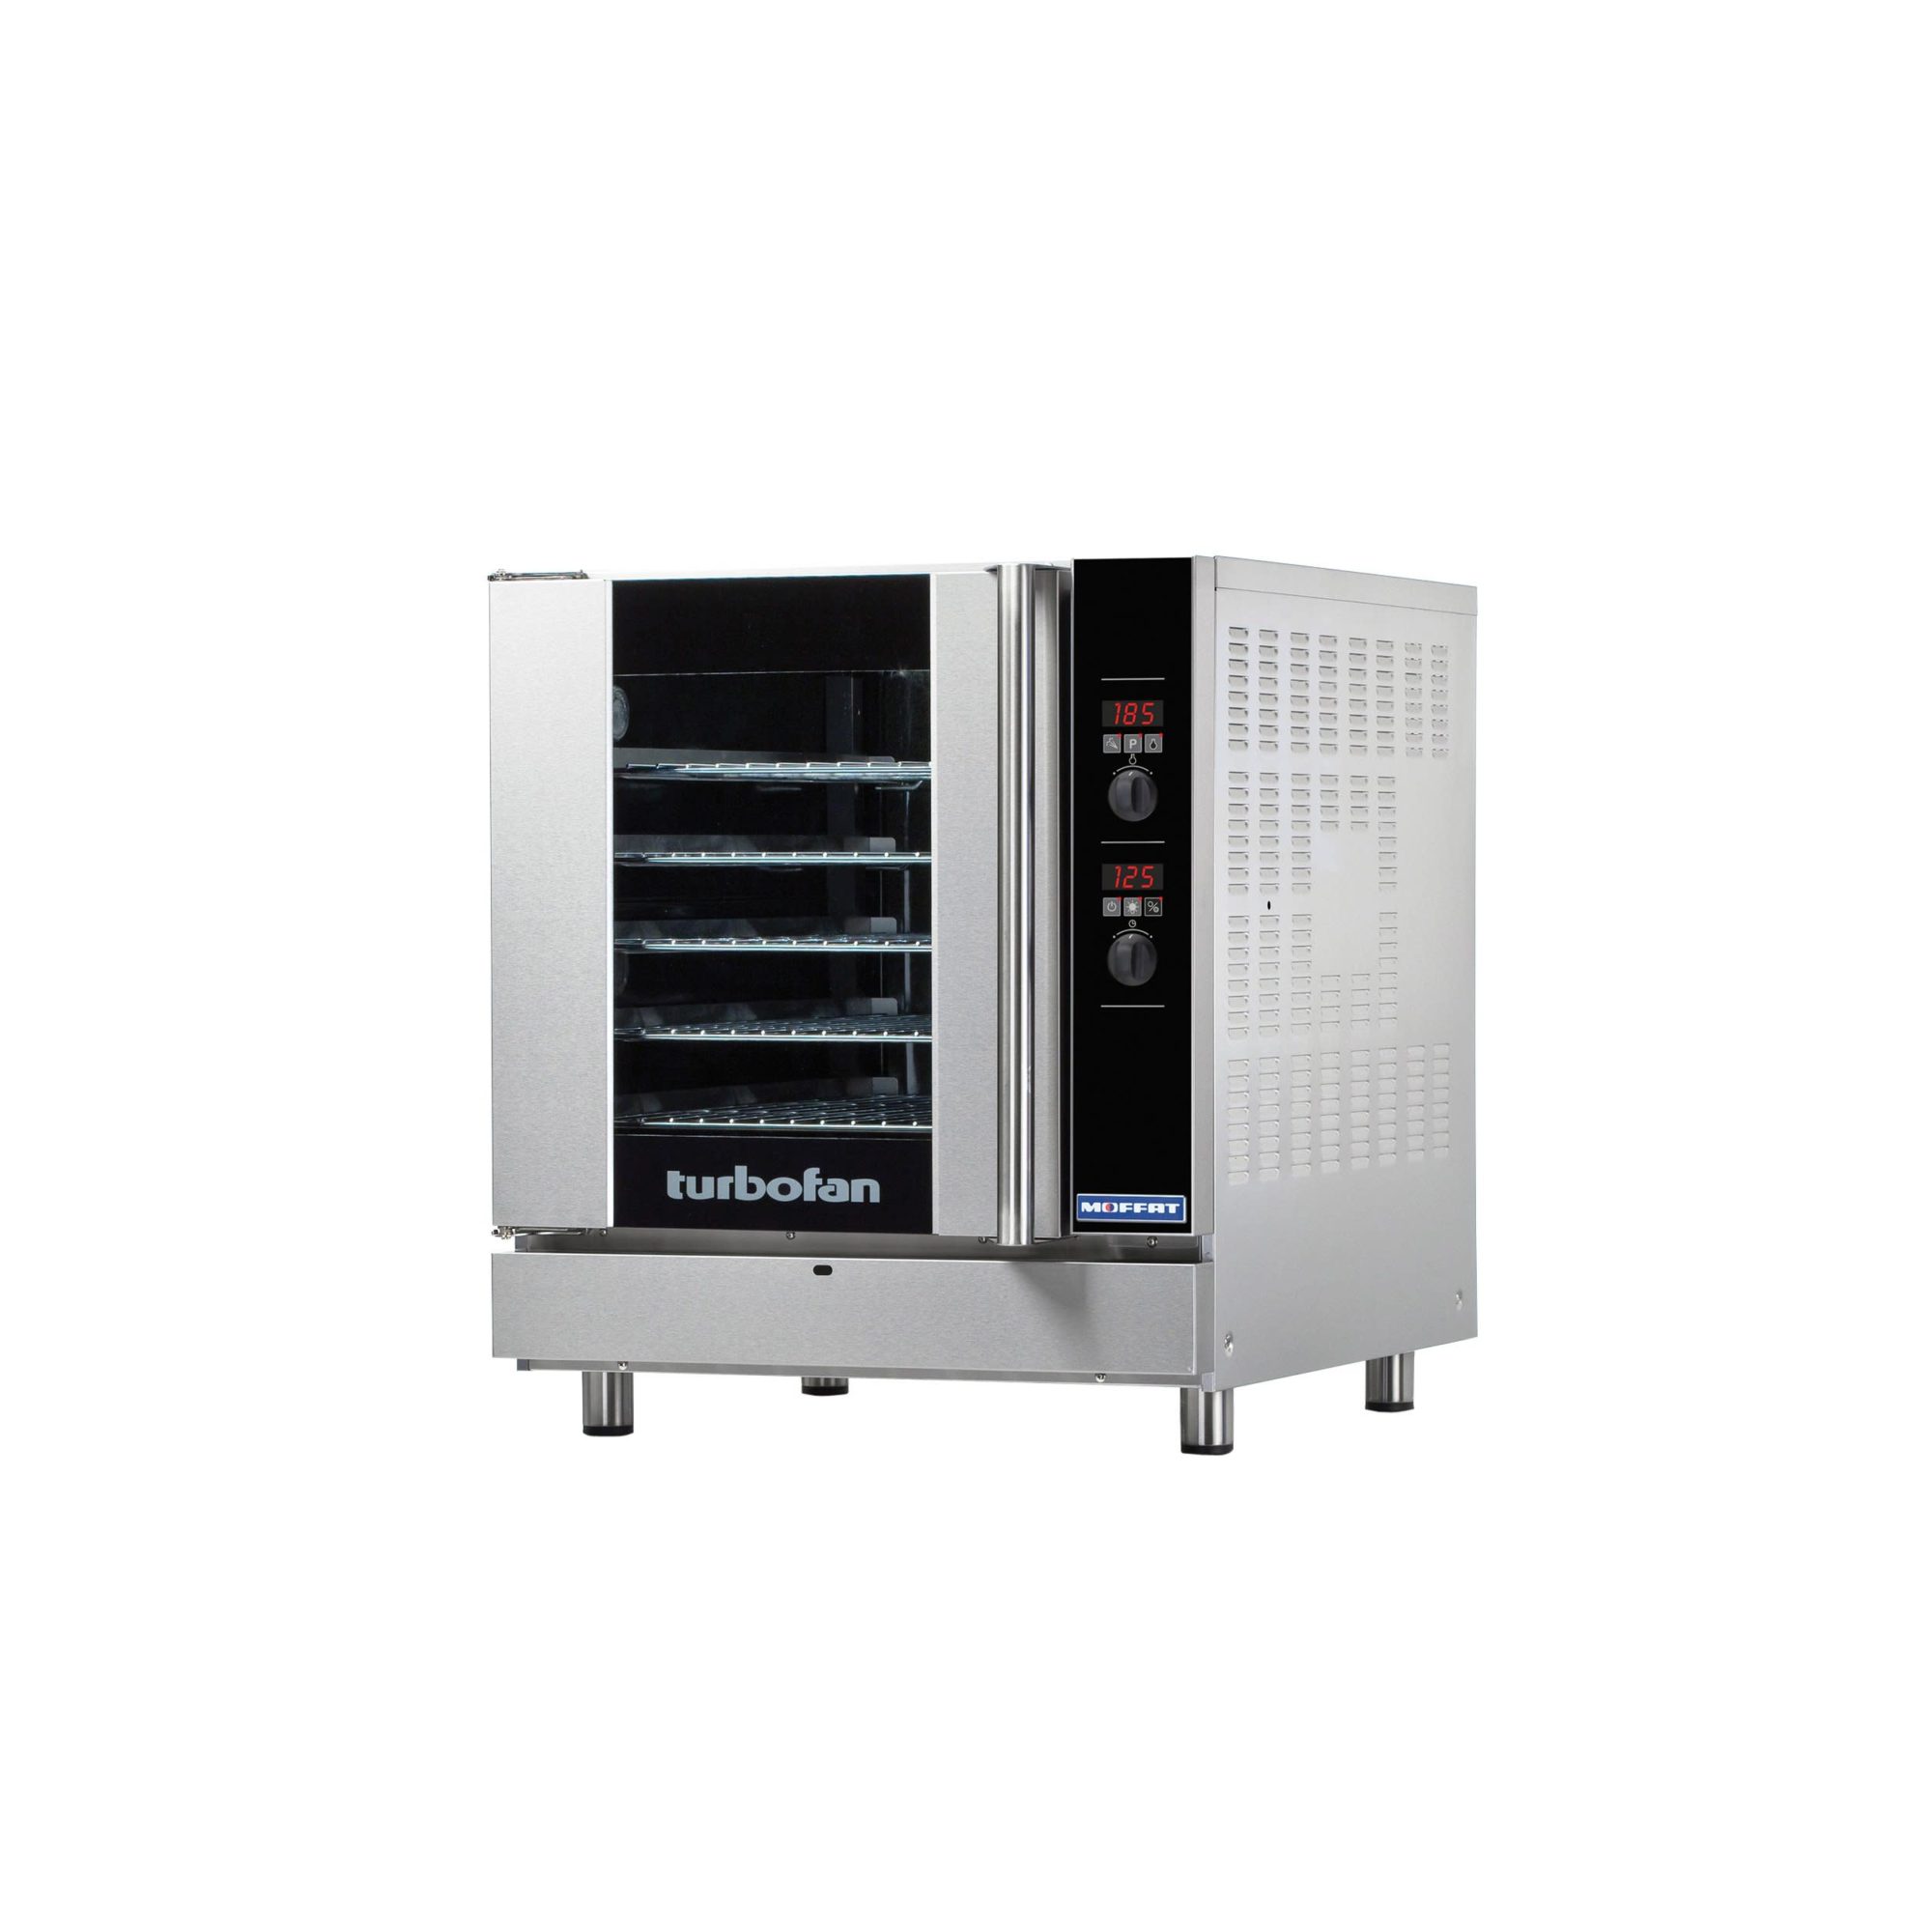 Turbofan G32D5 Full Size Natural Gas Convection Oven - 33,000 BTU Credit supplied by Enbridge gas $300